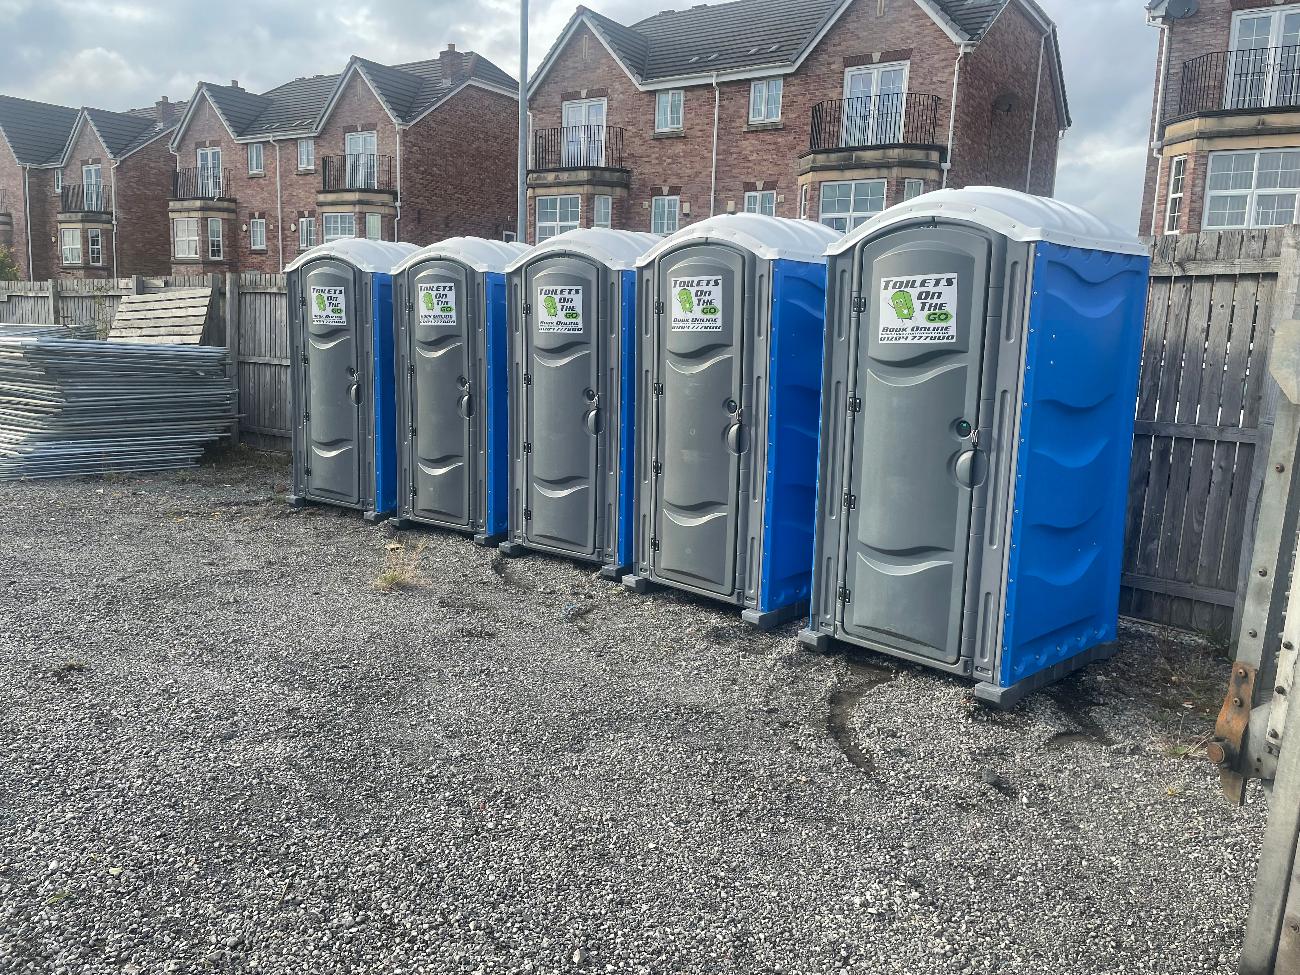 Gallery | Portable Toilet Loo Hire Rental Company in North West uk and Manchester gallery image 19